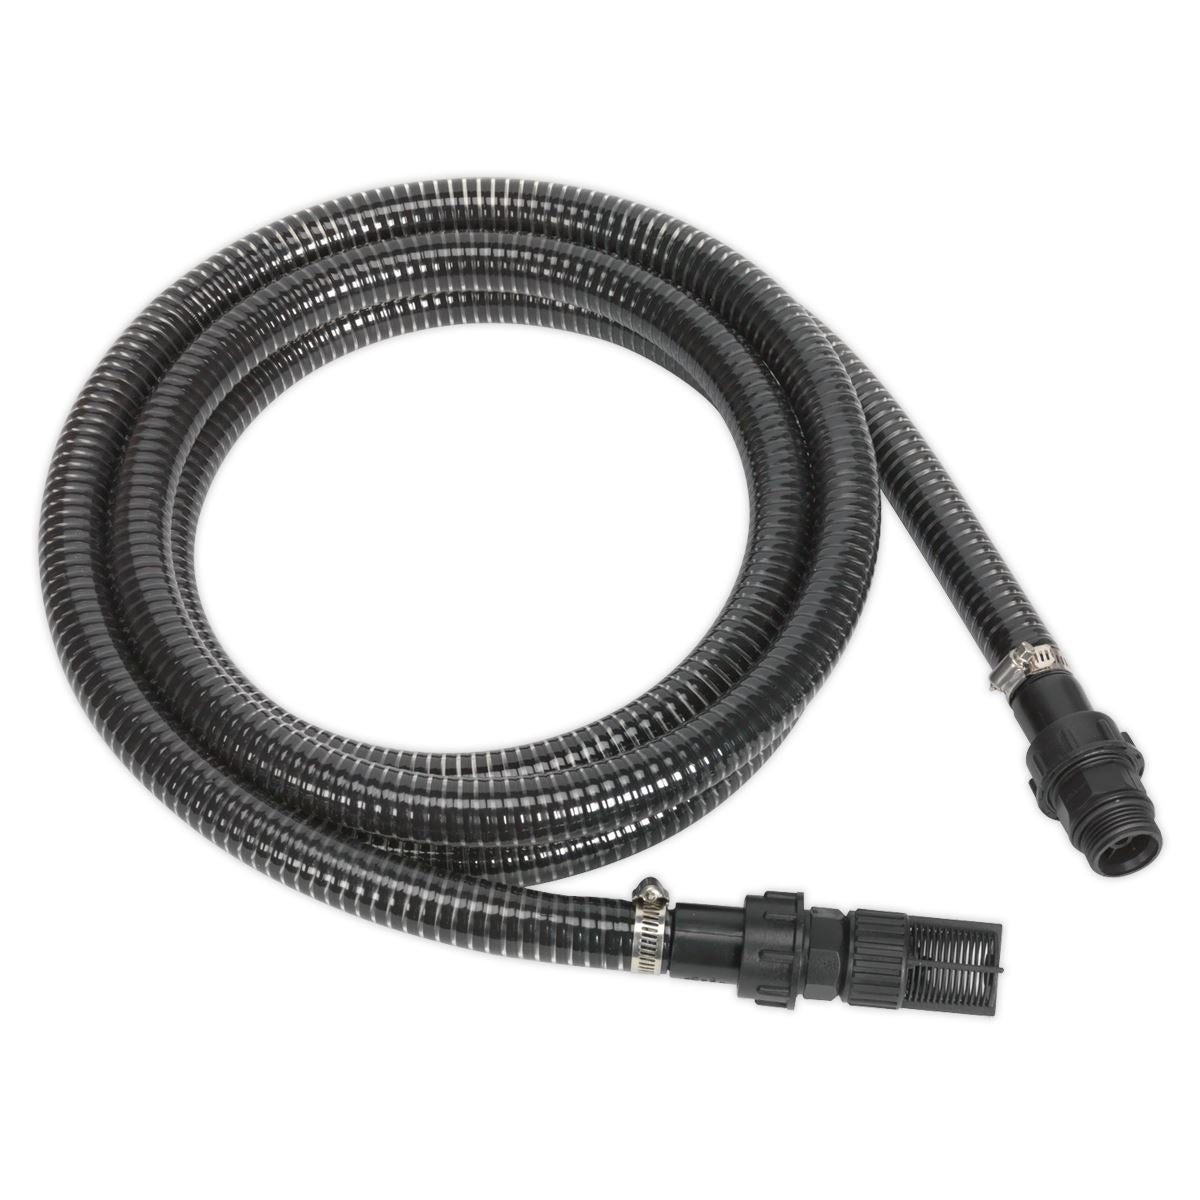 Sealey Solid Wall Suction Hose - Ø25mm x 4m